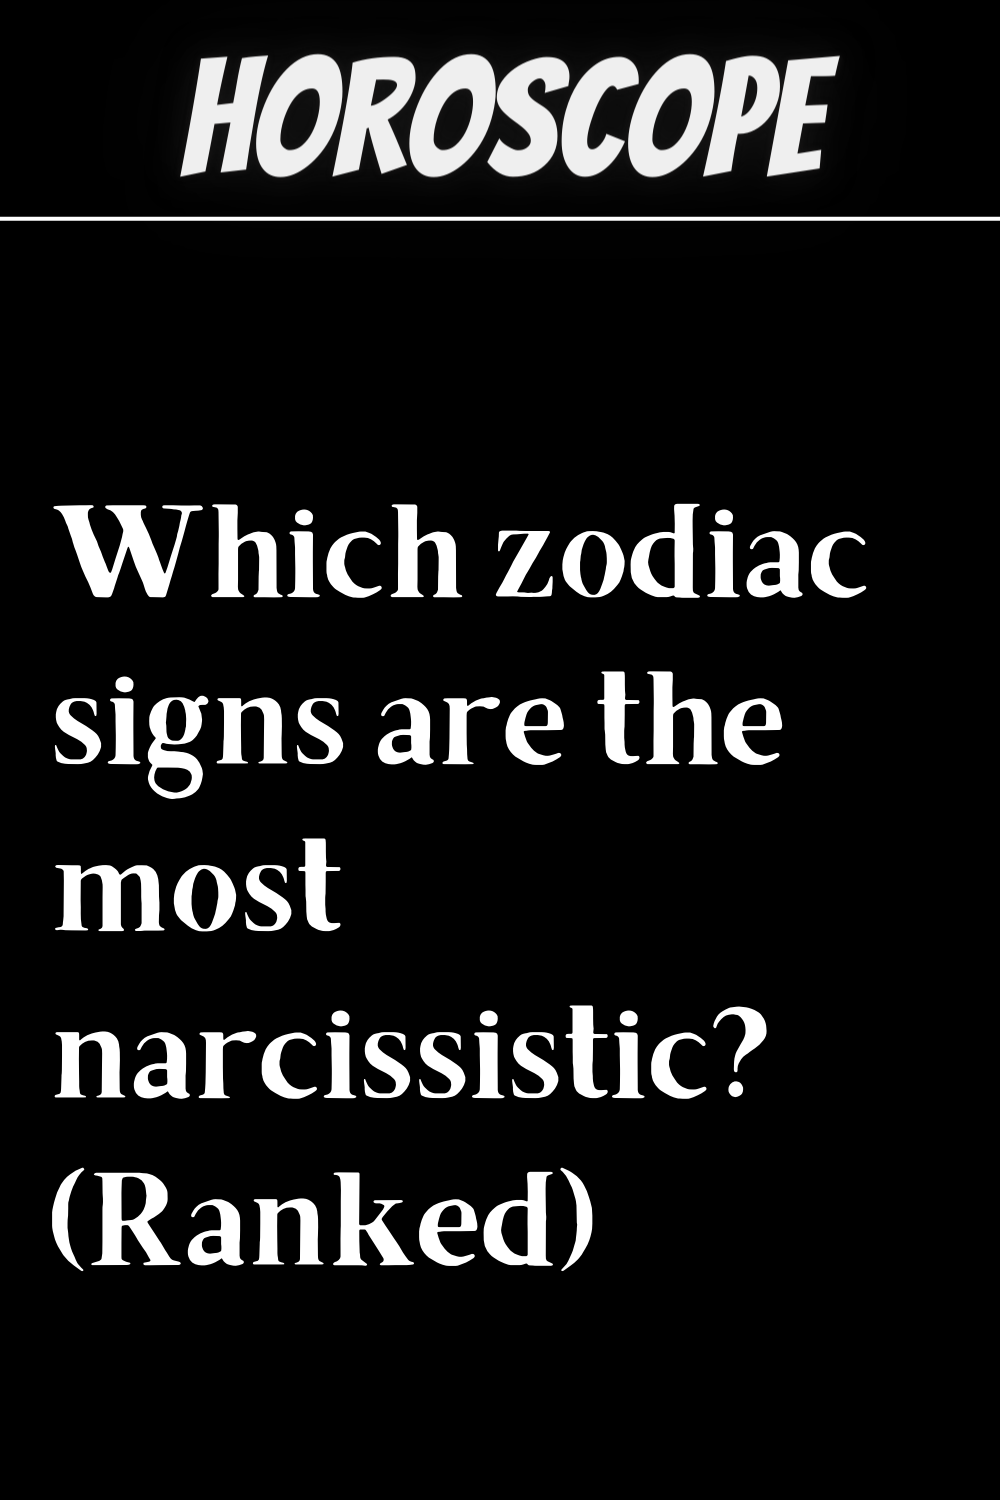 Which zodiac signs are the most narcissistic? (Ranked)